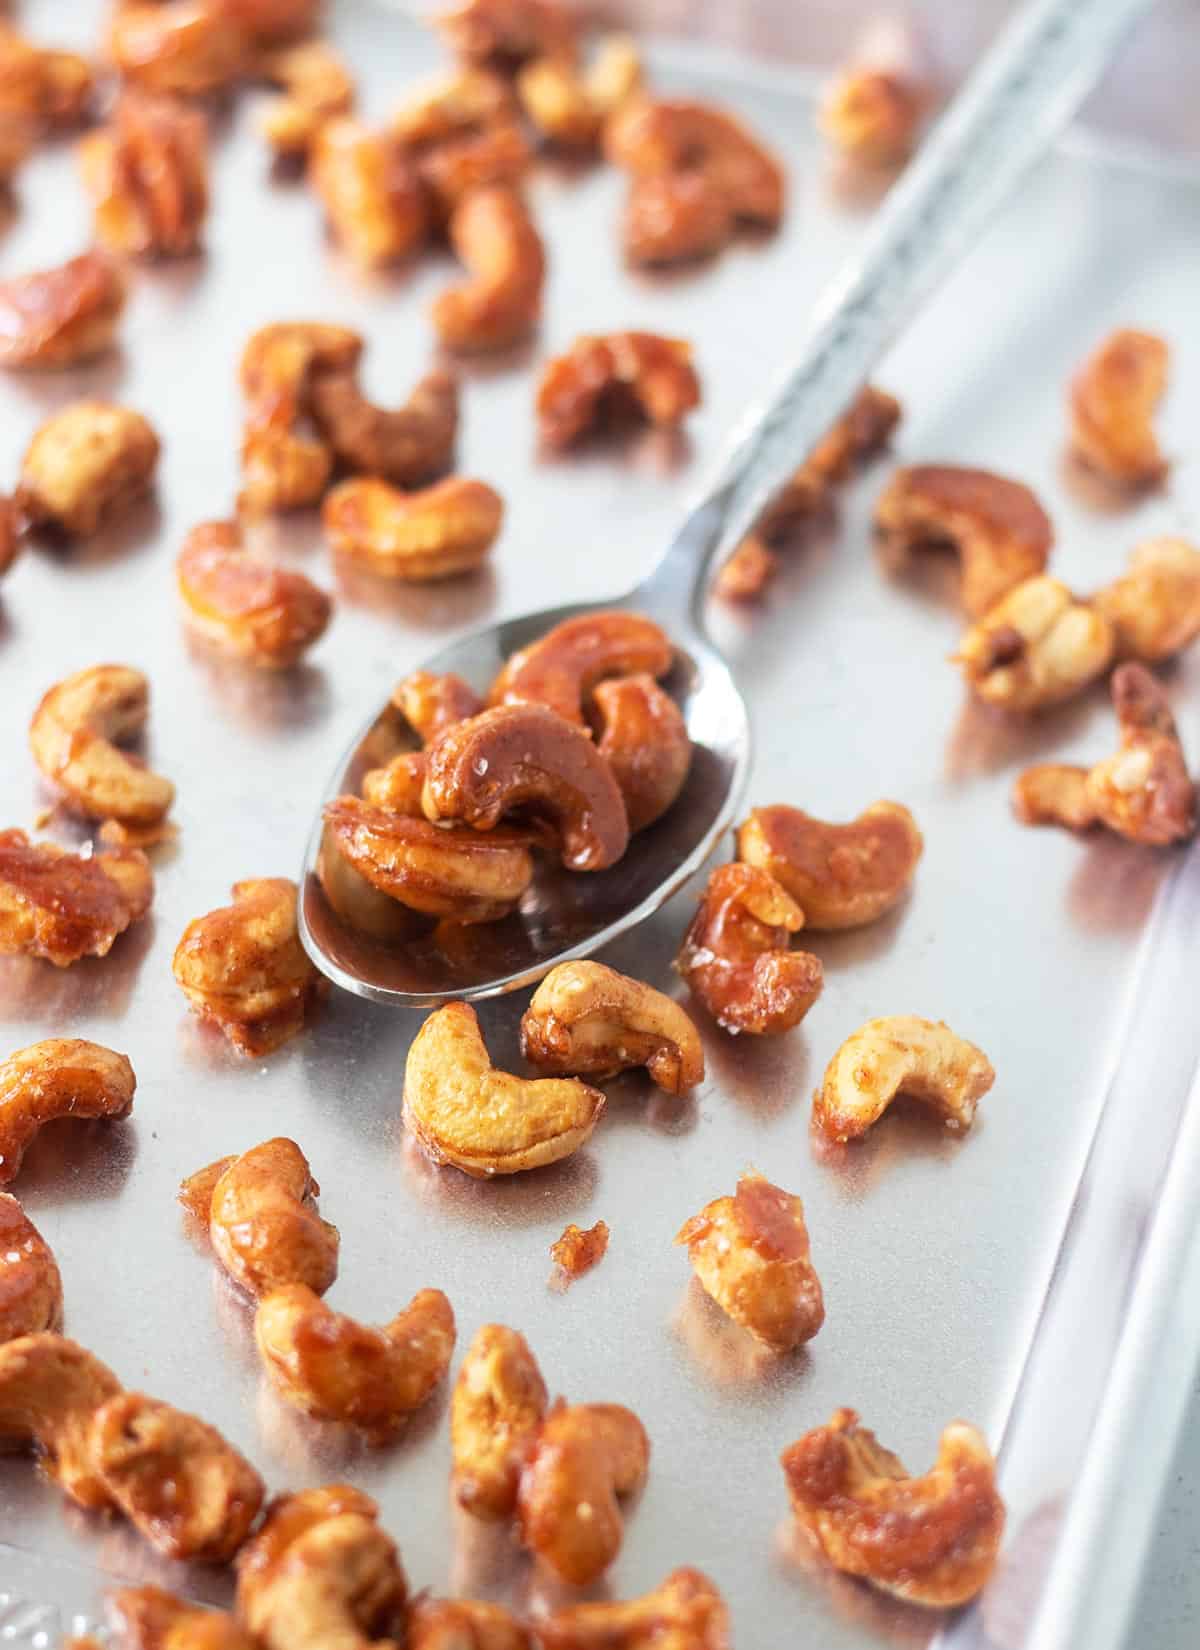 honey roasted cashews on a baking pan after being roasted with a silver spoon scooping some nuts up.